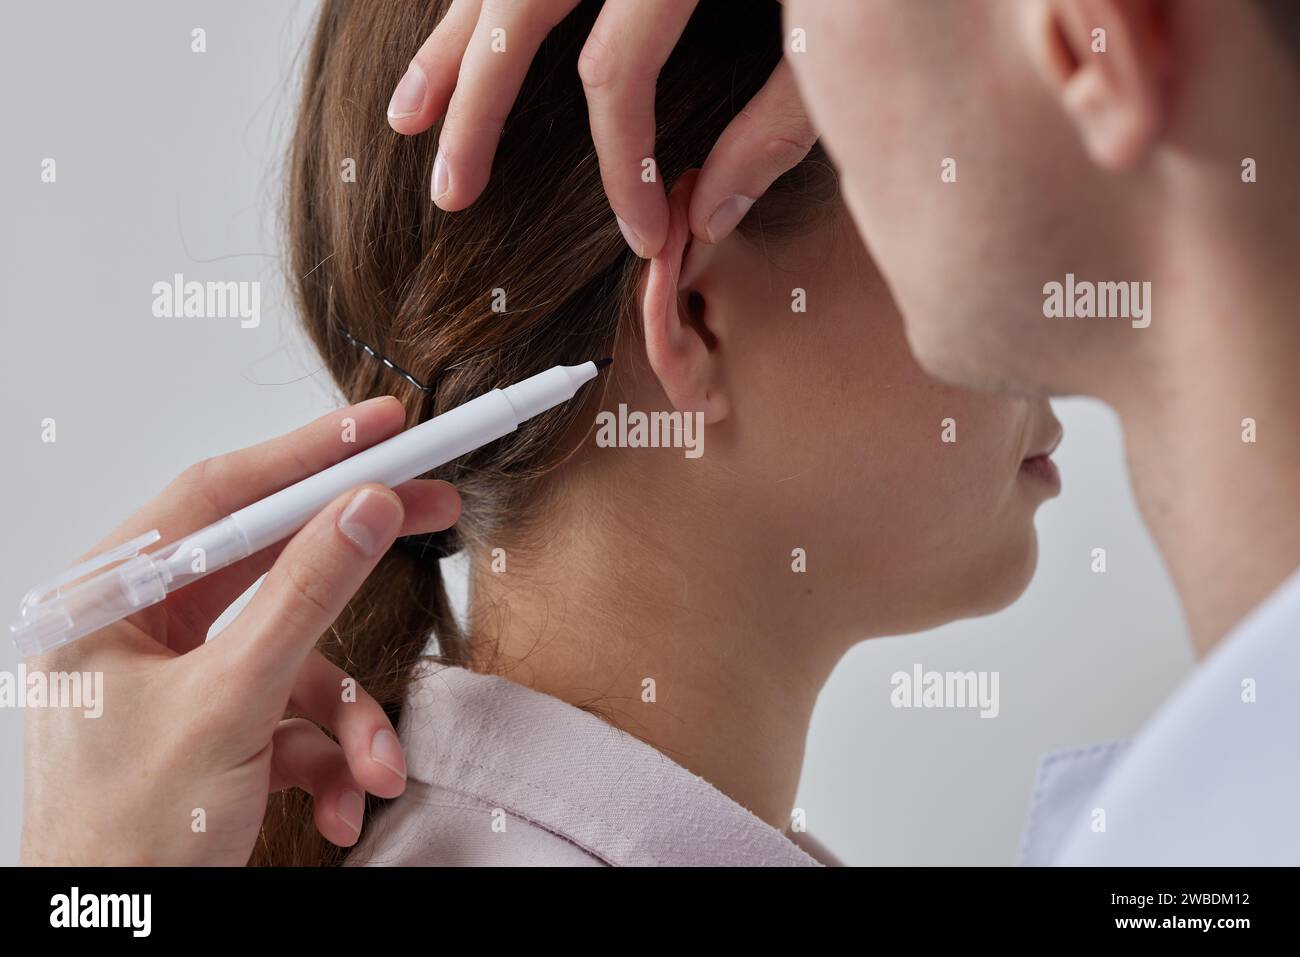 Otoplasty markup for surgical reshaping of the pinna, or outer ear for correcting an irregularity and improving appearance. Surgeon doctor marking gir Stock Photo